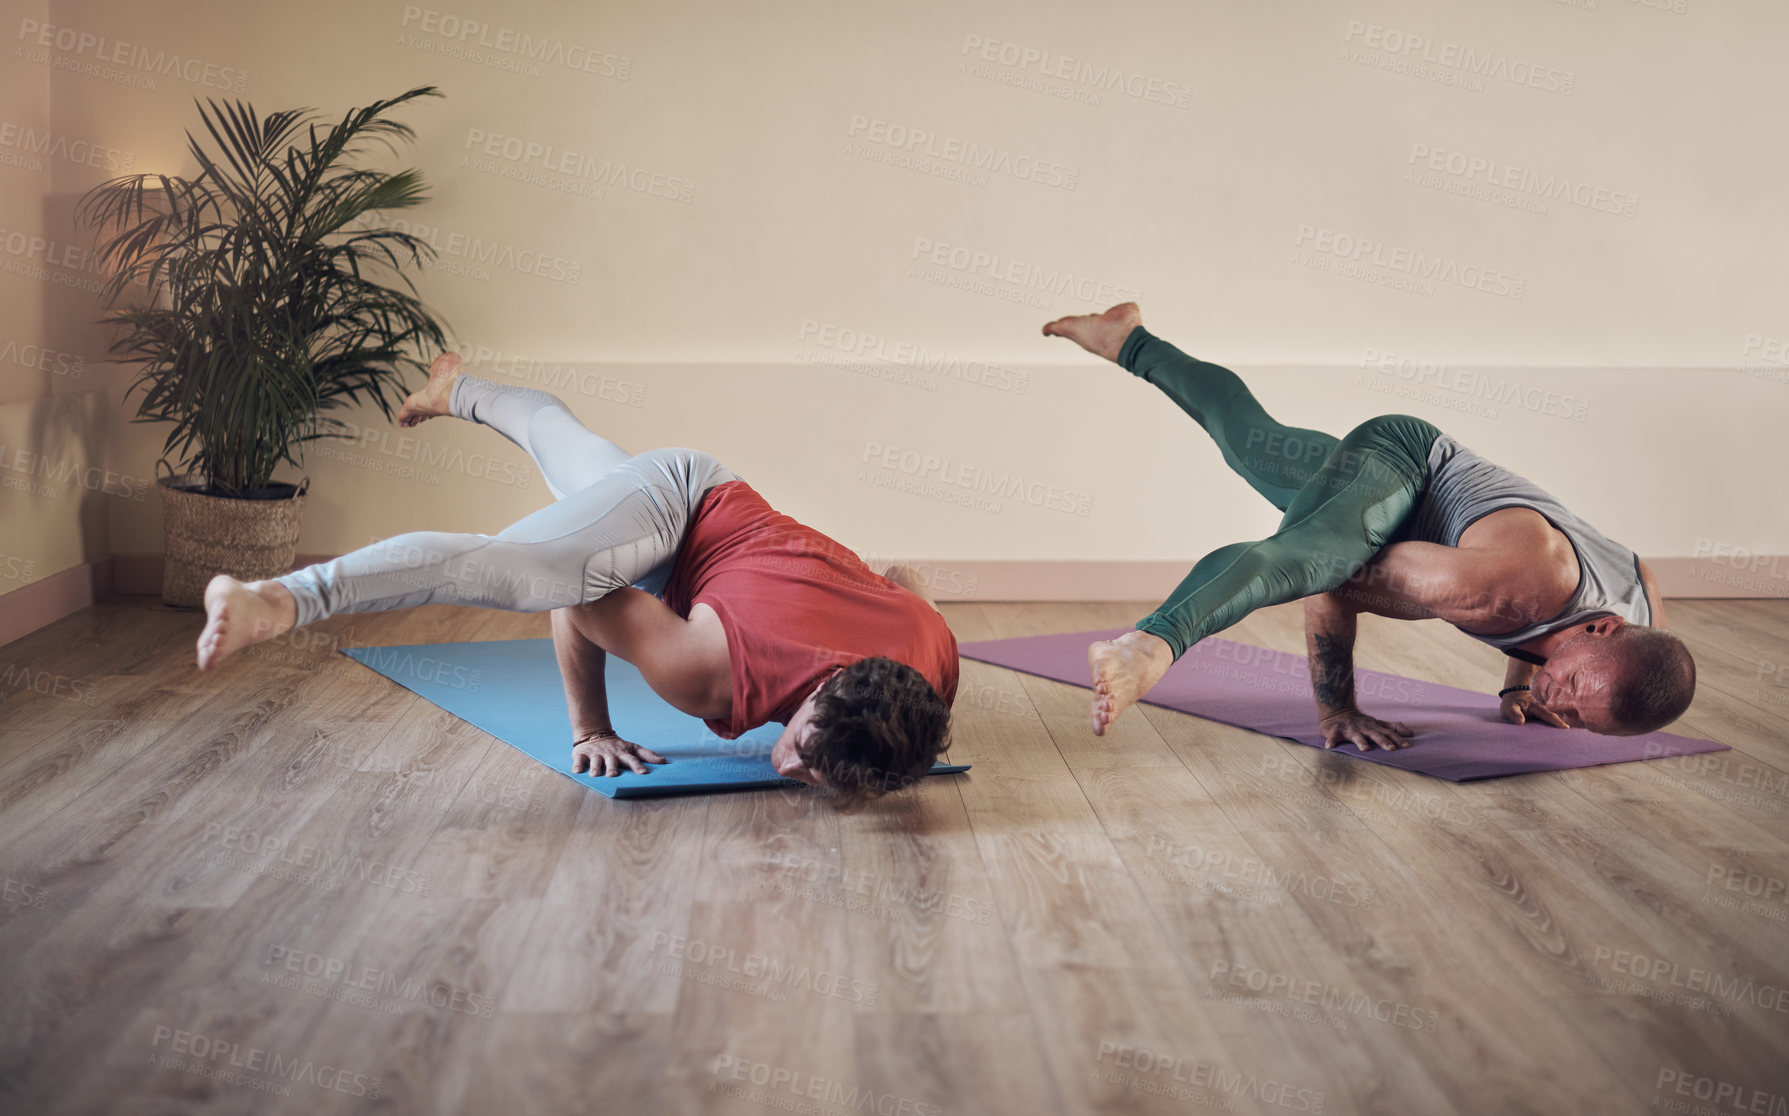 Buy stock photo Full length shot of two young men holding an extended side crow pose during an indoor yoga session together